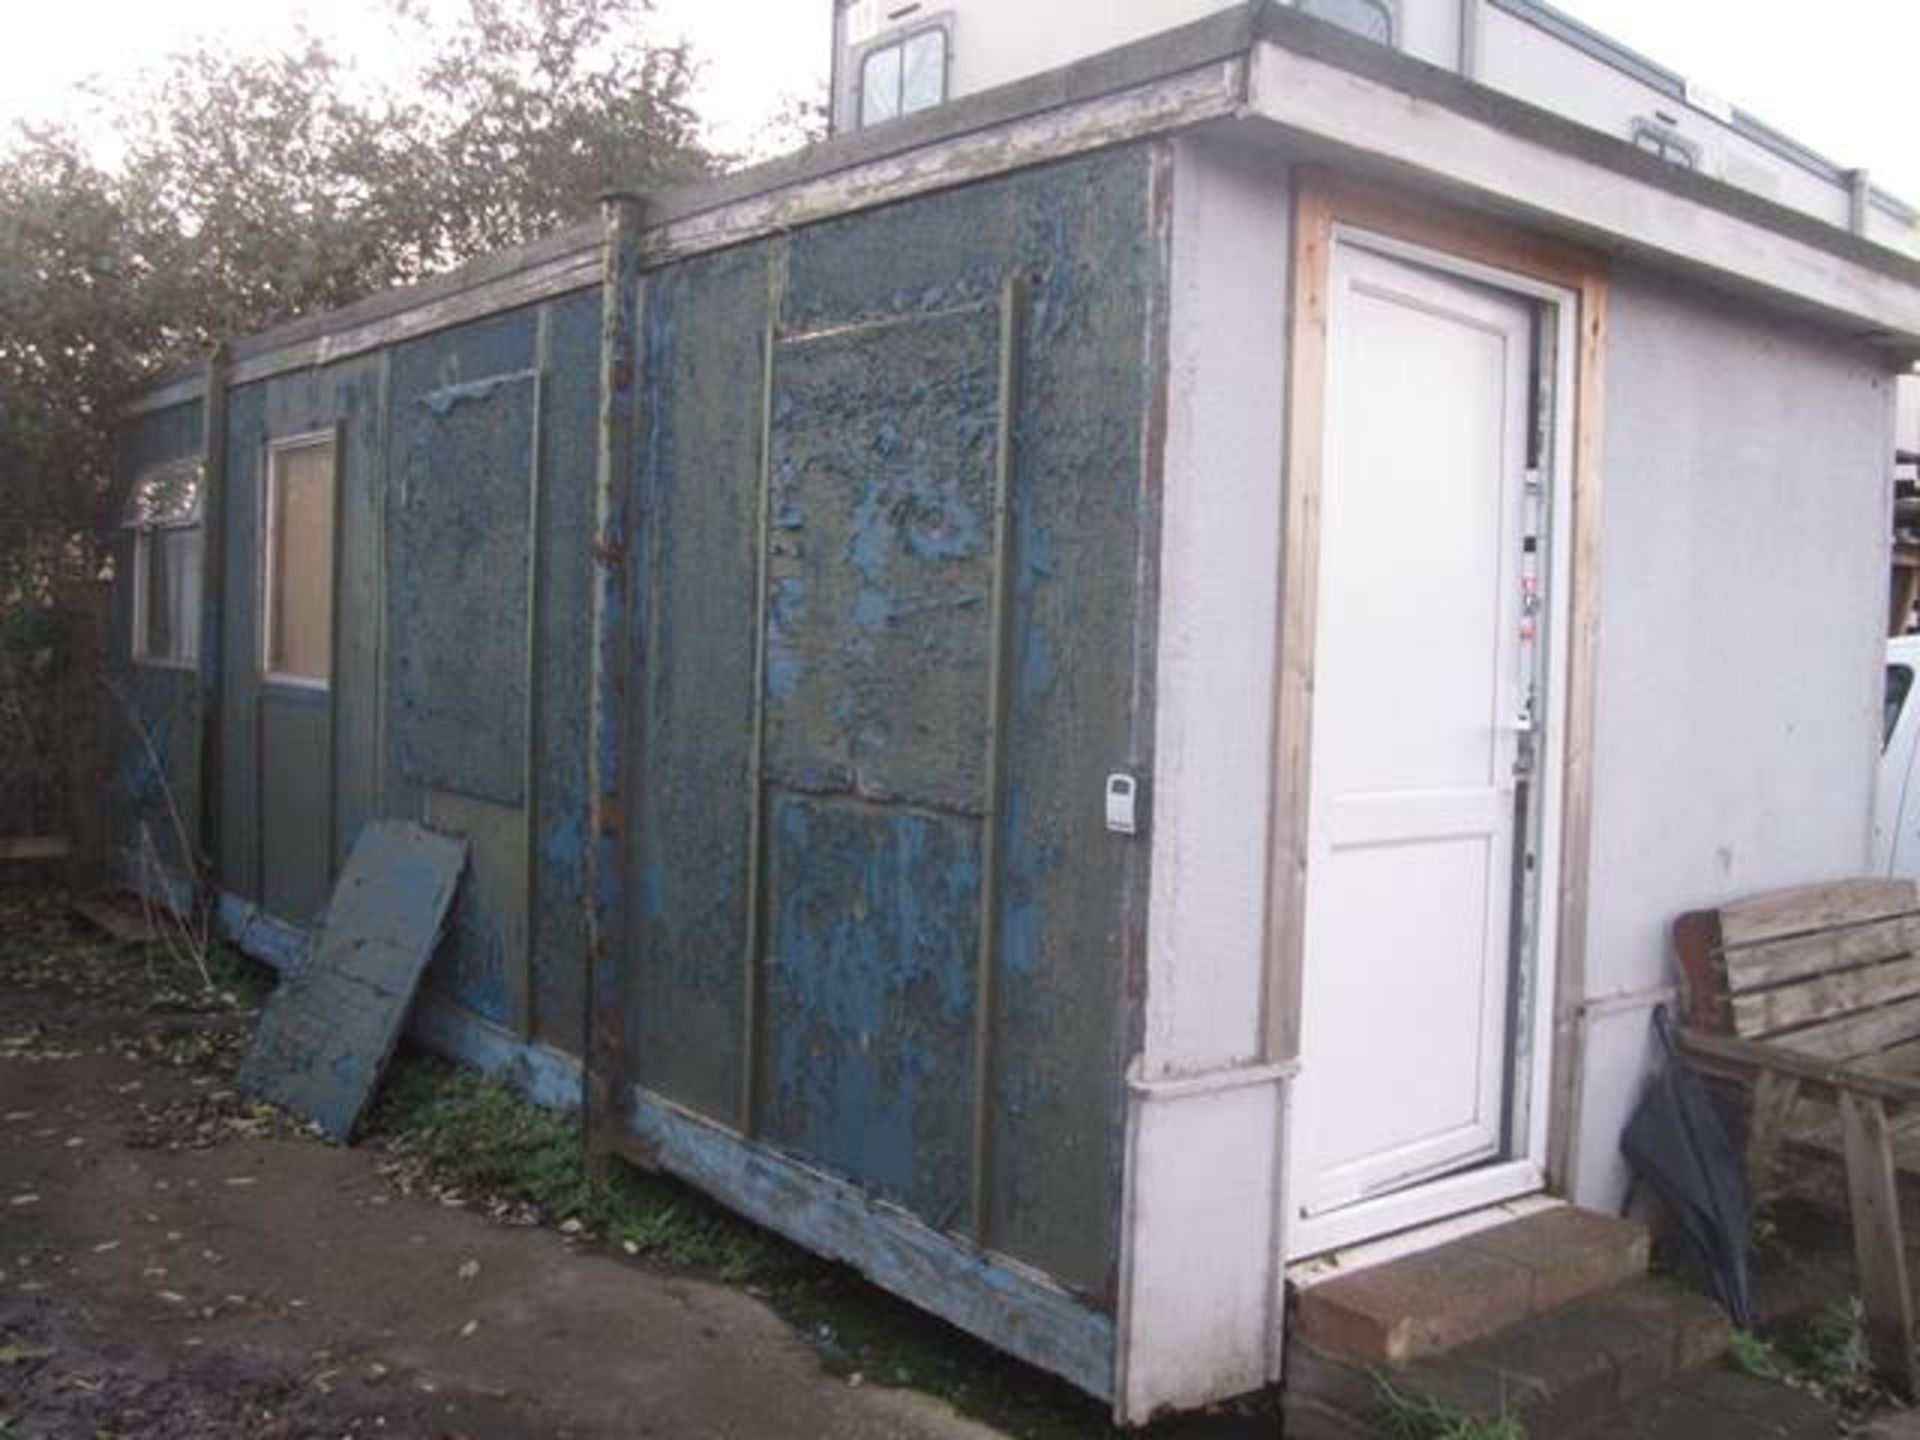 PortaKabin jackleg portacabin /office accomodation, approx 7m length, fitted kitchen area, - Image 2 of 4